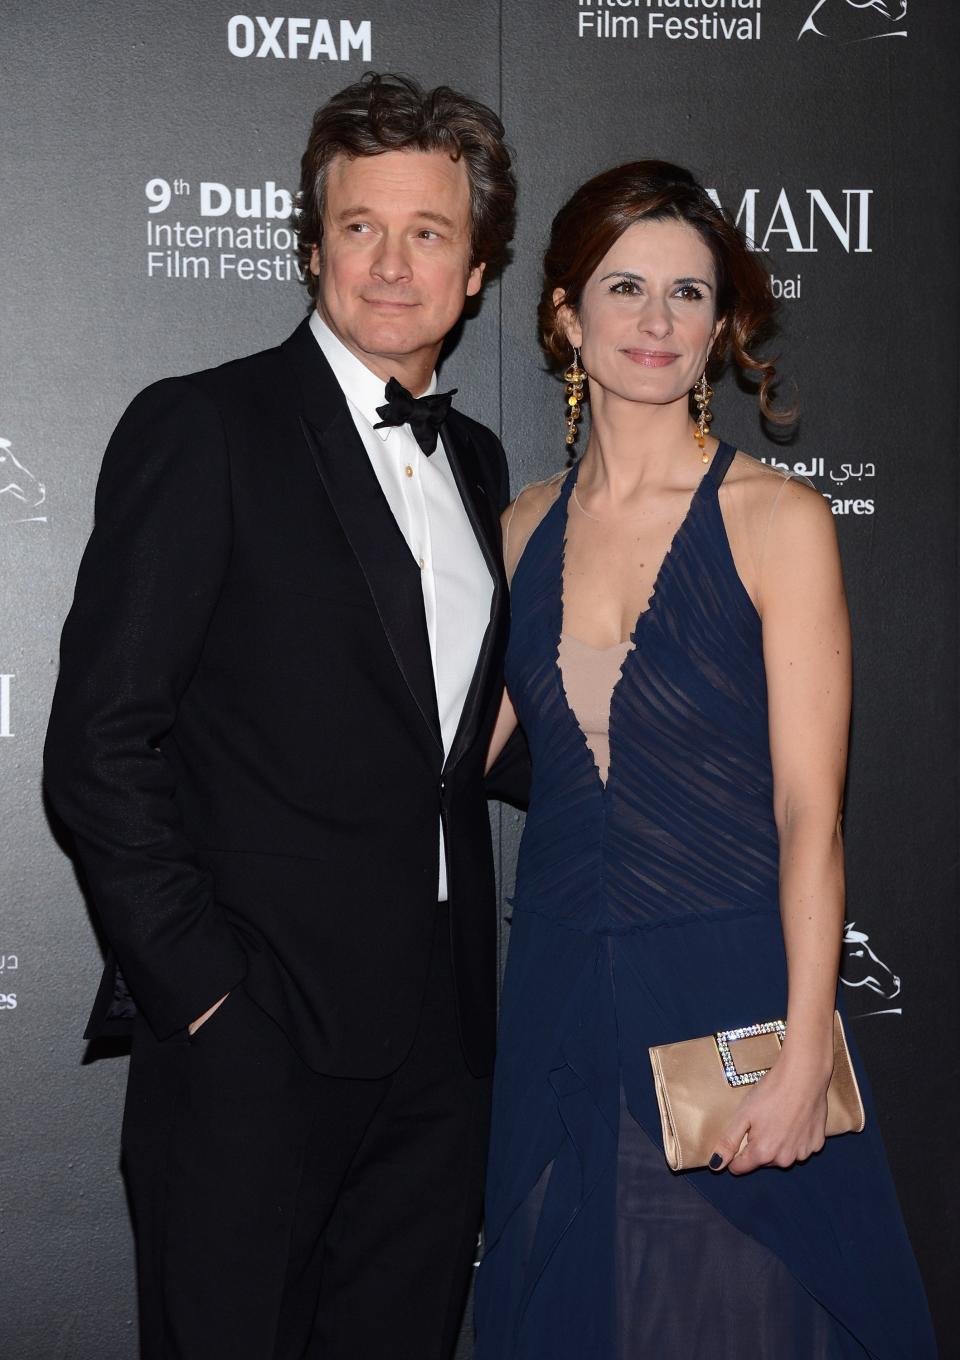 DUBAI, UNITED ARAB EMIRATES - DECEMBER 14: Actor Colin Firth with his wife Livia attend the 2012 Dubai International Film Festival, Dubai Cares and Oxfam "One Night to Change Lives" Charity Gala at the Armani Hotel on December 14, 2012 in Dubai, United Arab Emirates. (Photo by Andrew H. Walker/Getty Images for DIFF)